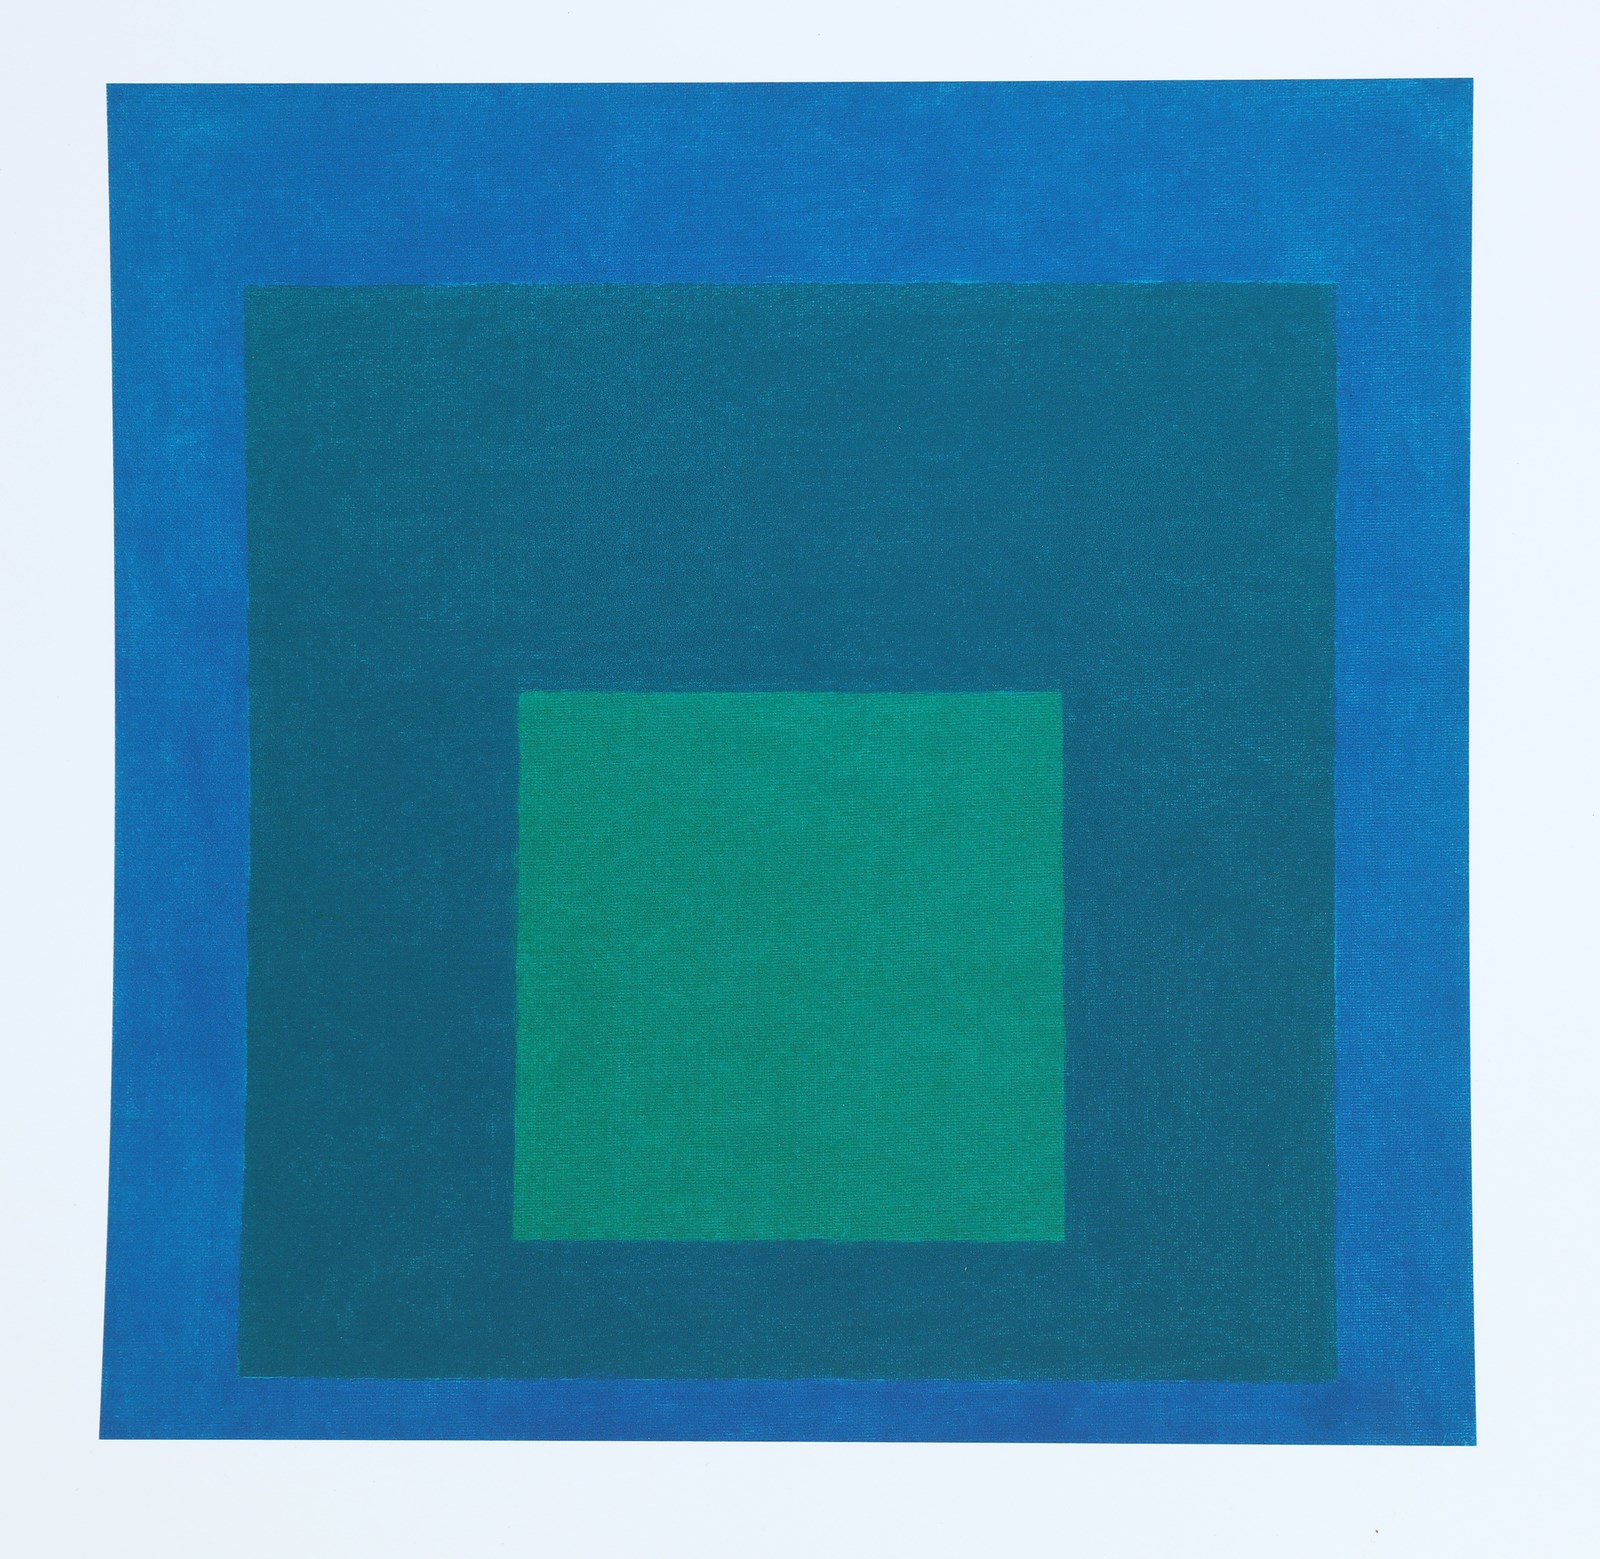 Study for homage to the square: Beaming. (Josef Albers)